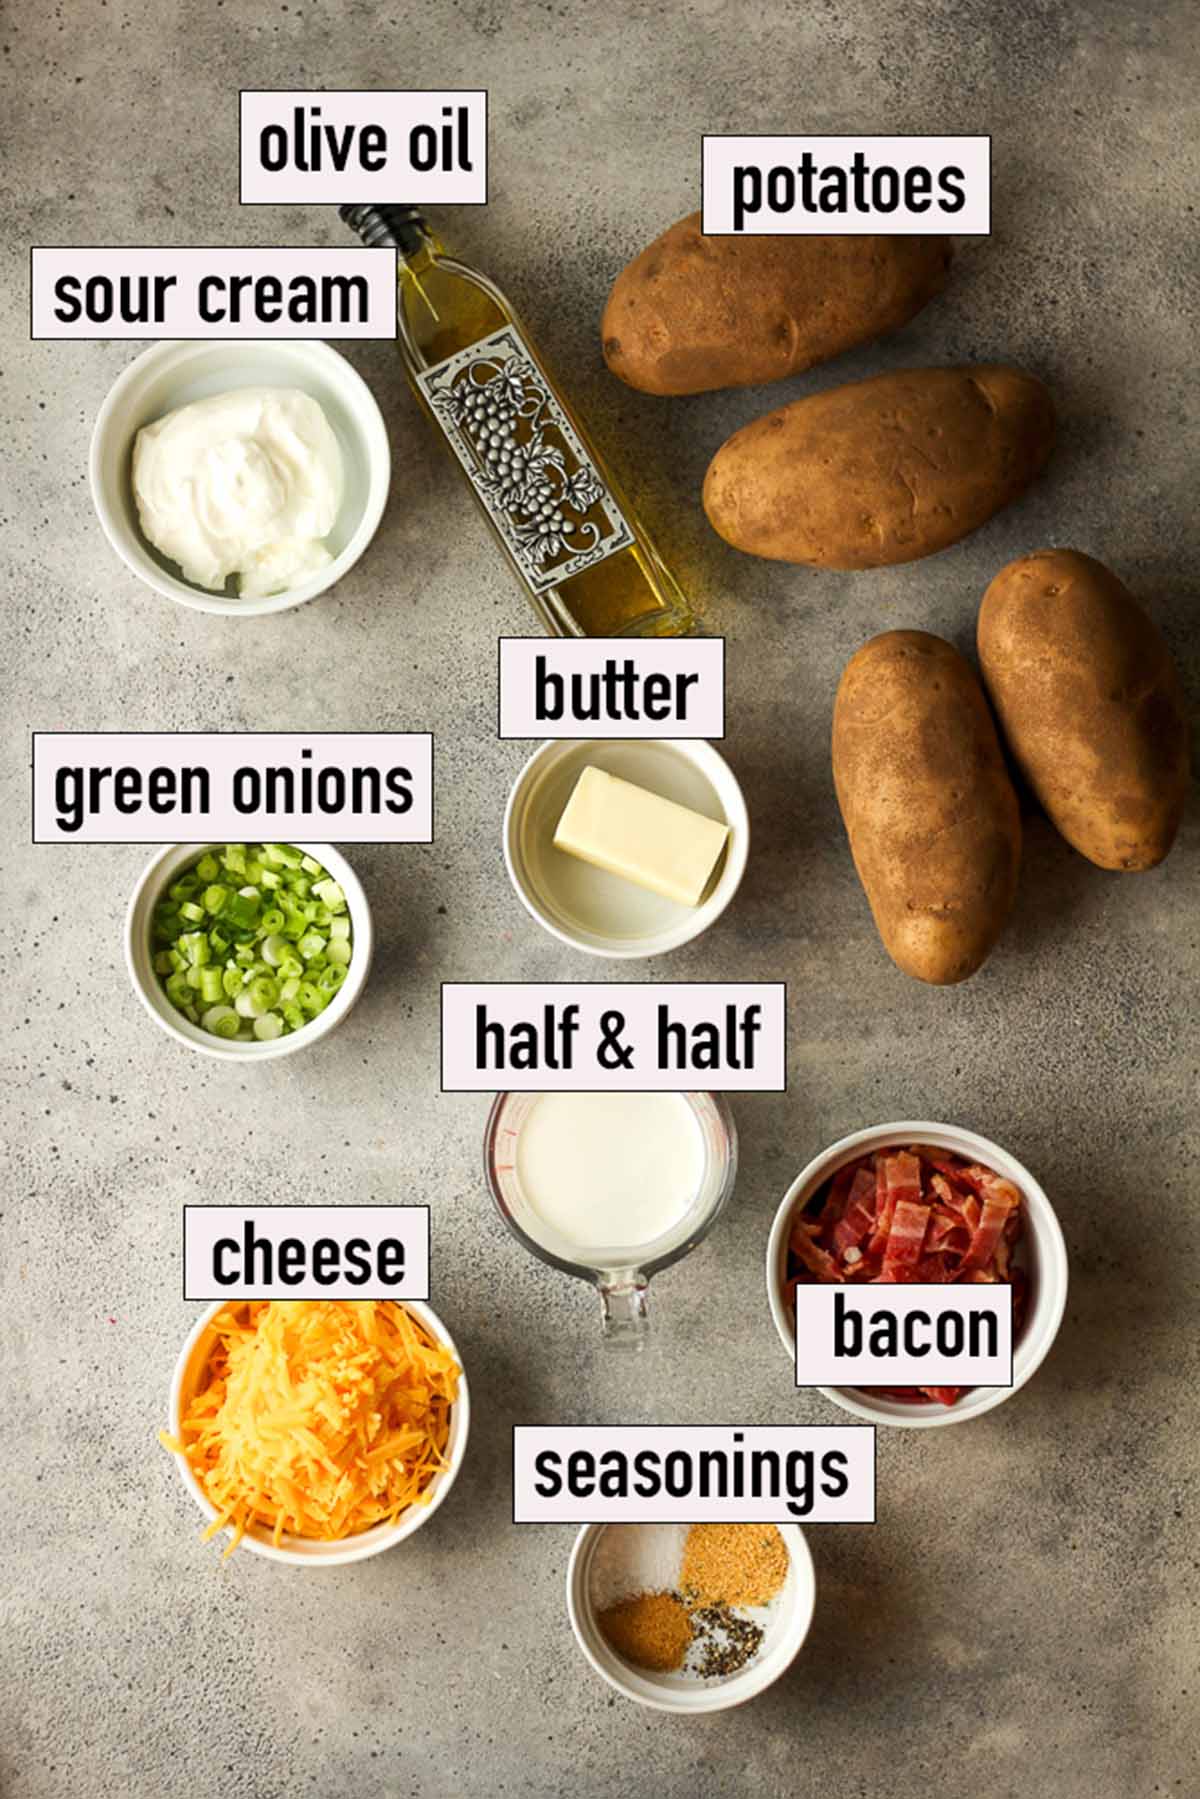 The labeled ingredients for the twice baked potatoes.